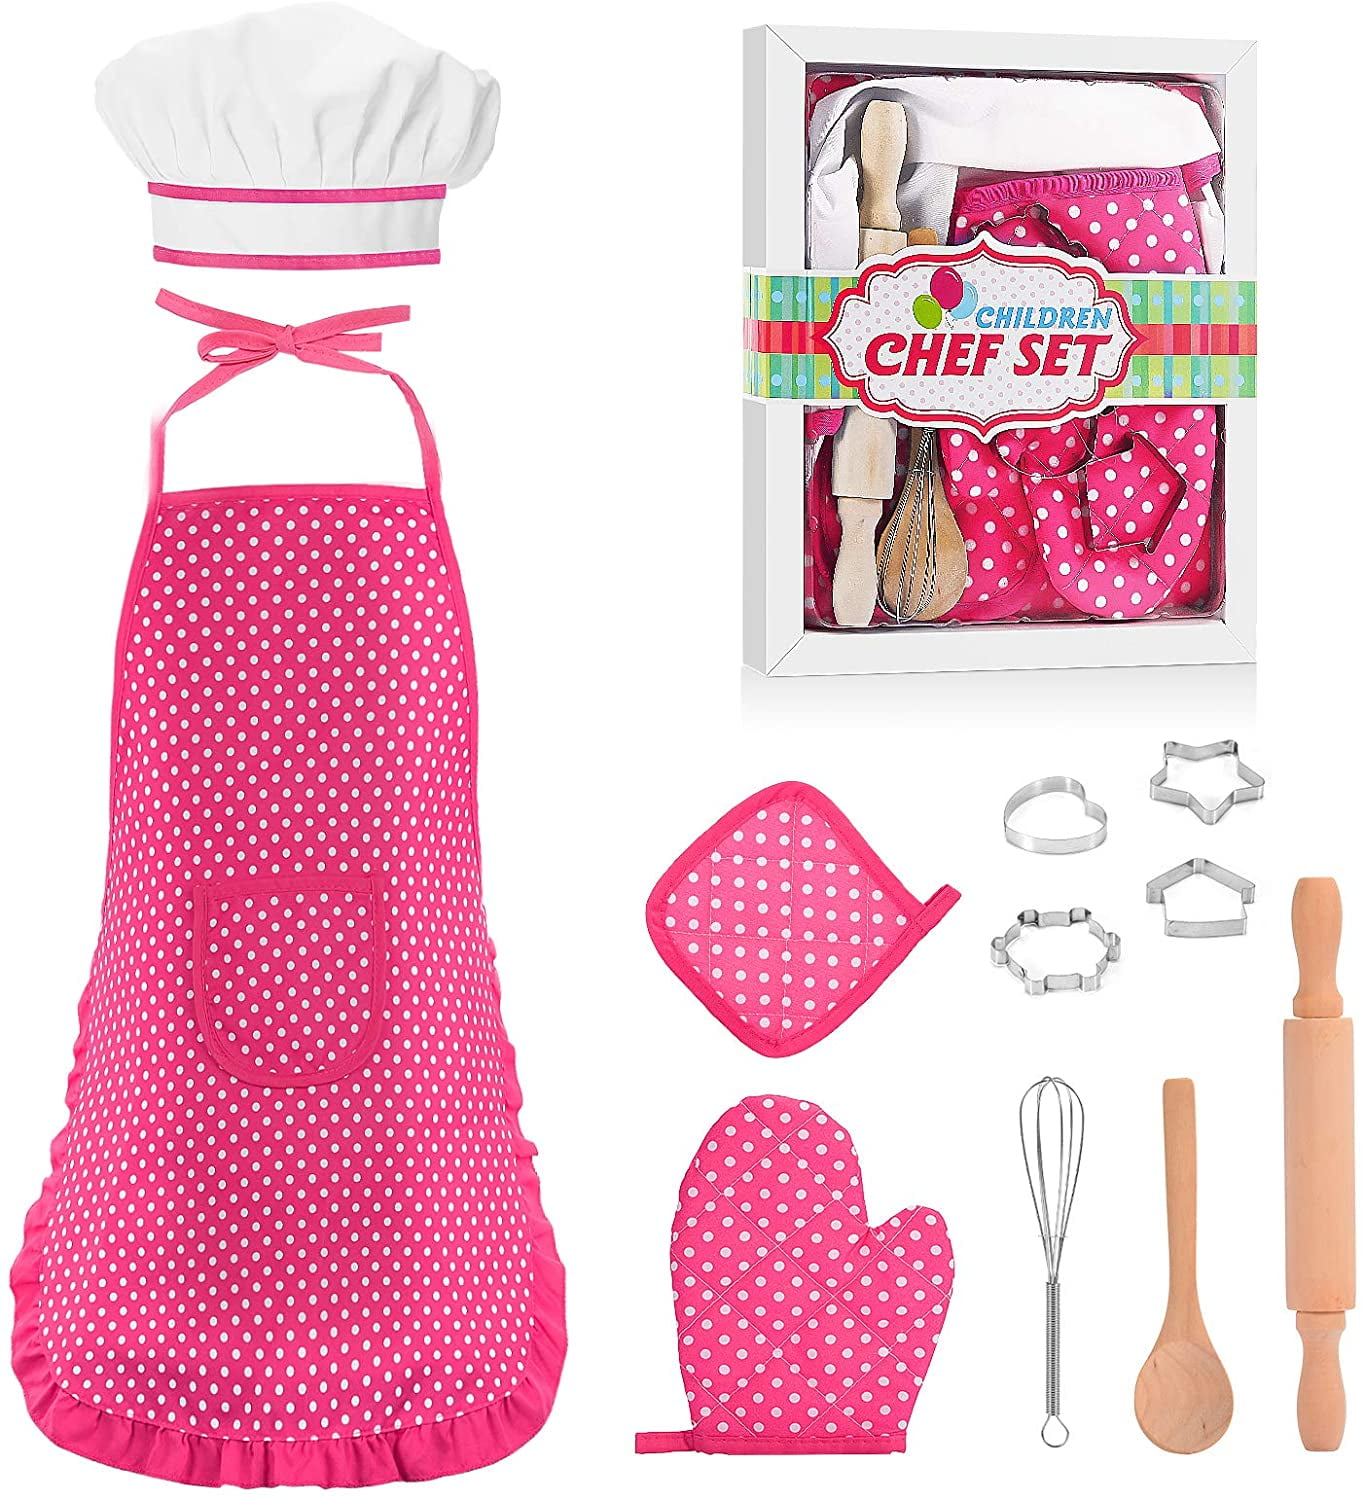 Chef Hat 4Pcs Kids Cooking and Baking Set Includes Apron for Little Girls Y2W8 